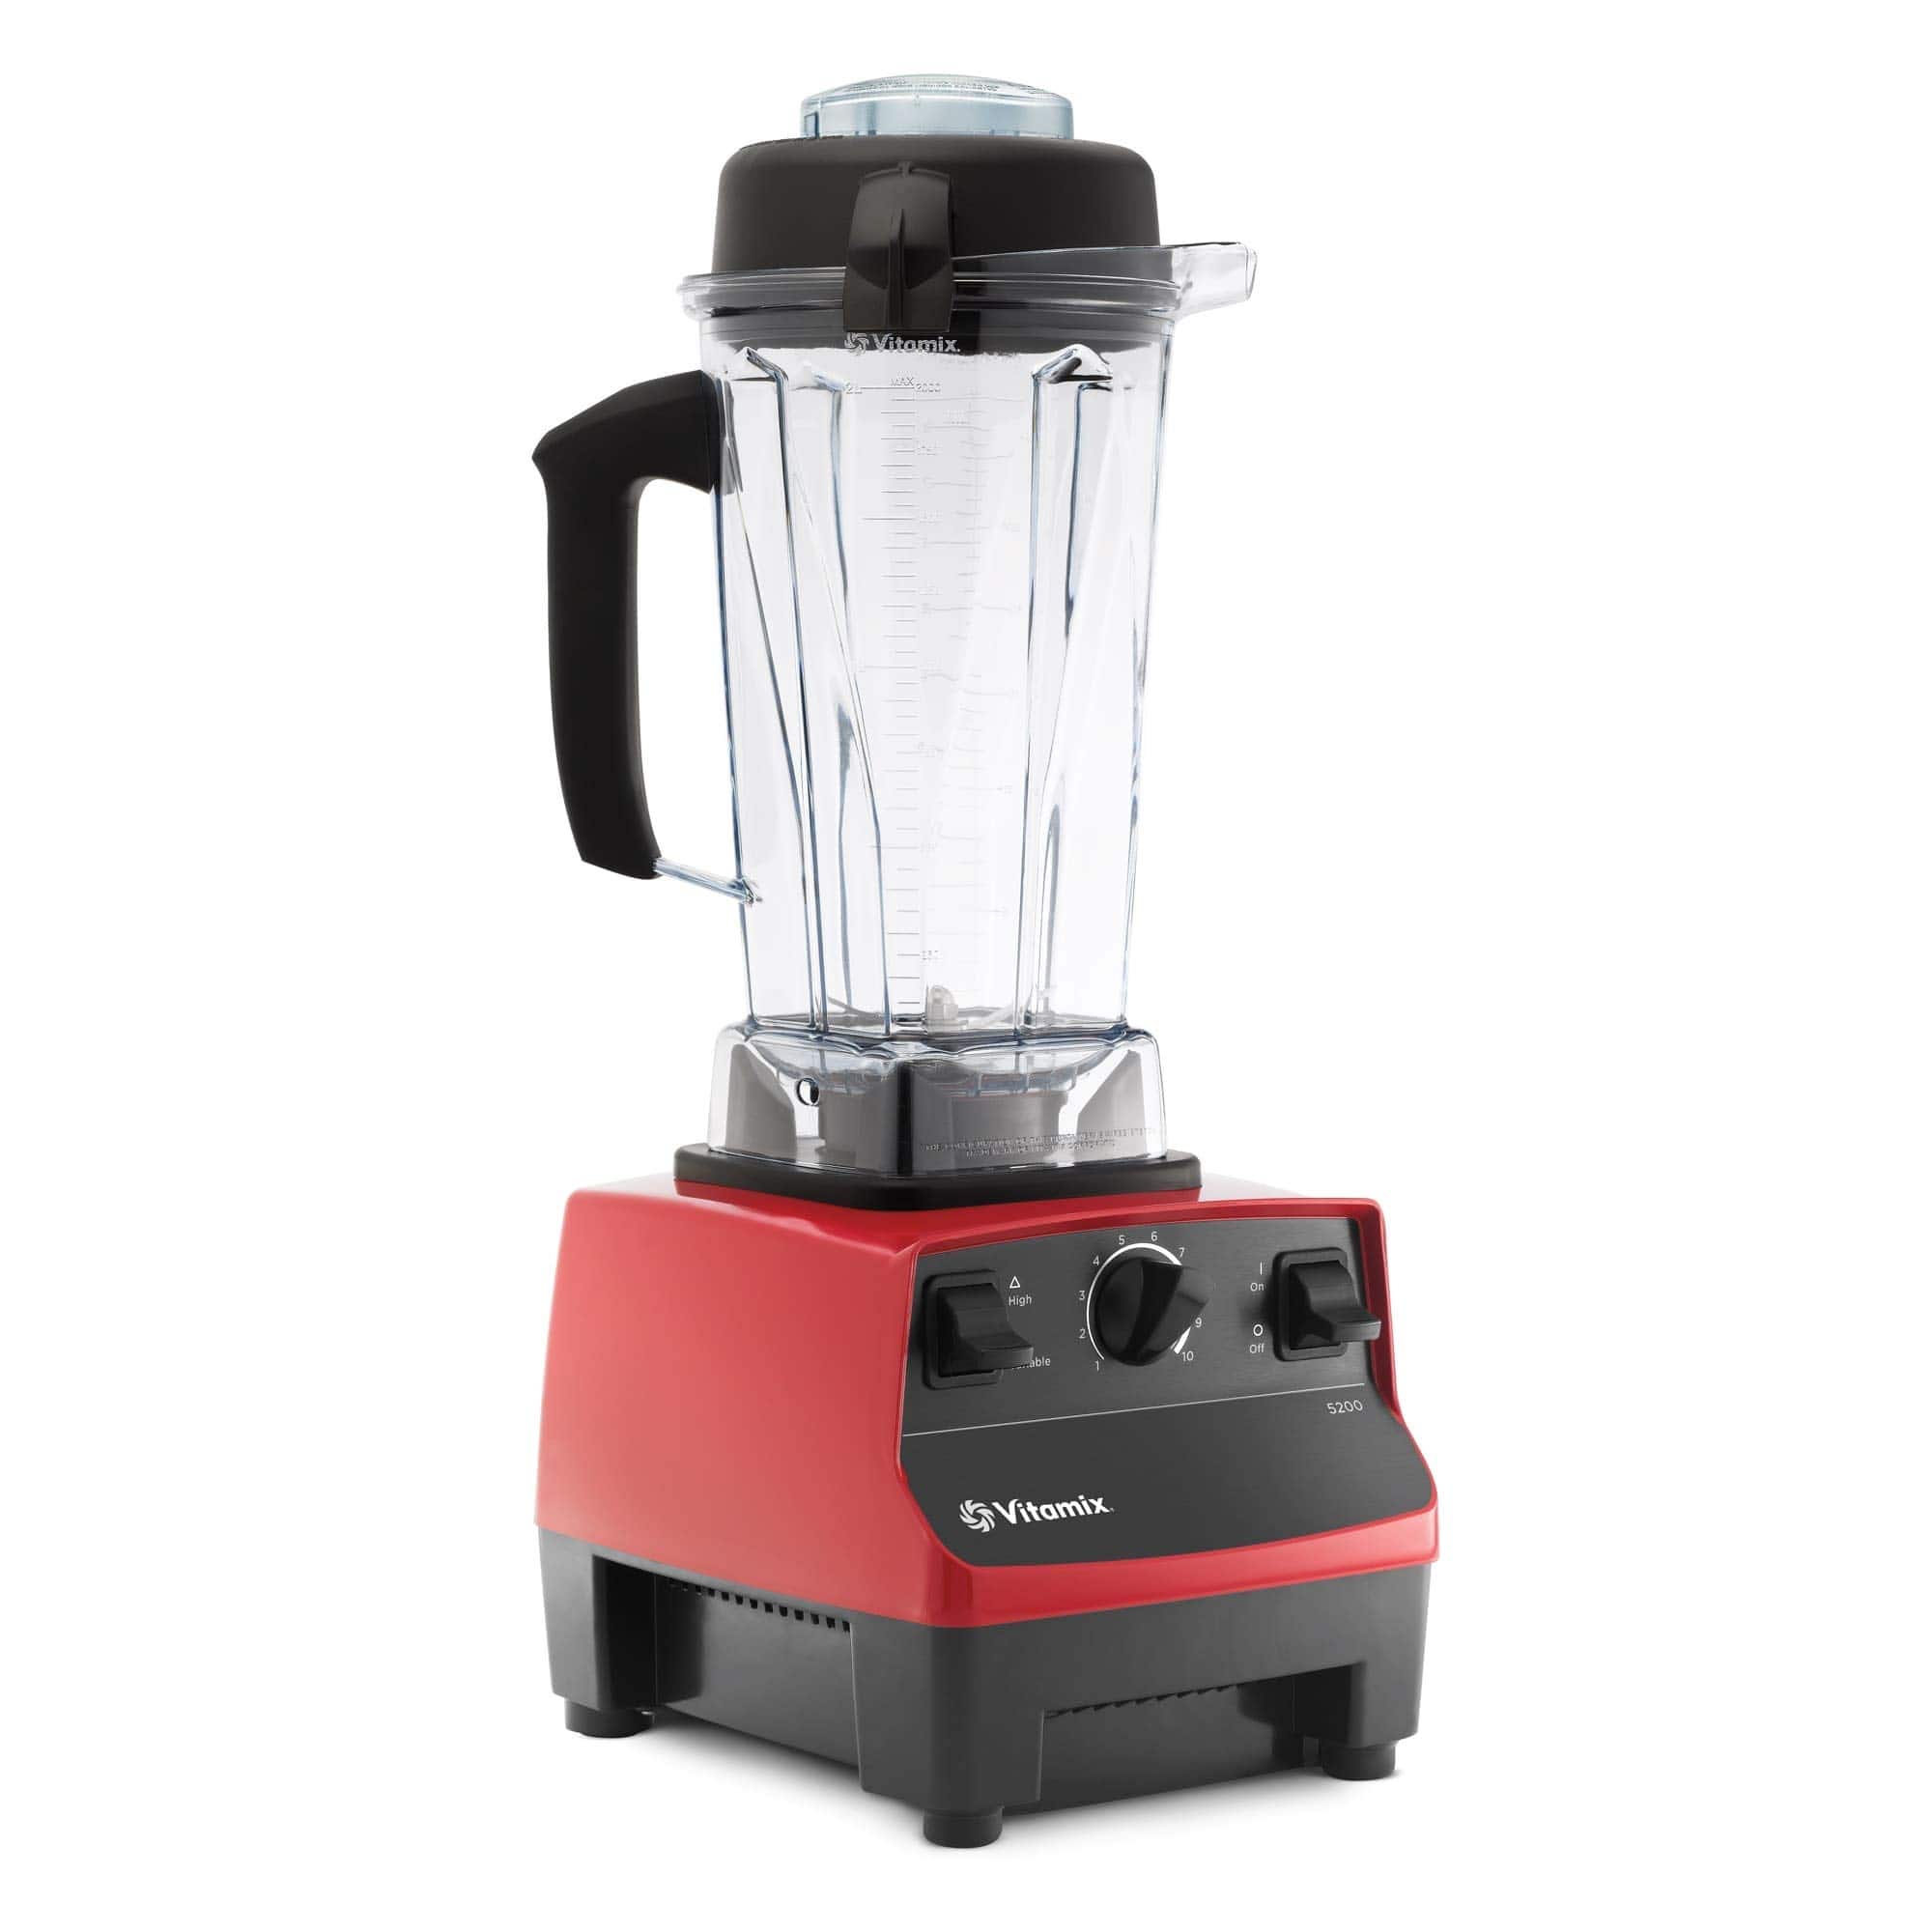 64 oz. Container, 5200 Blender,-Grade, Self-Cleaning, Red